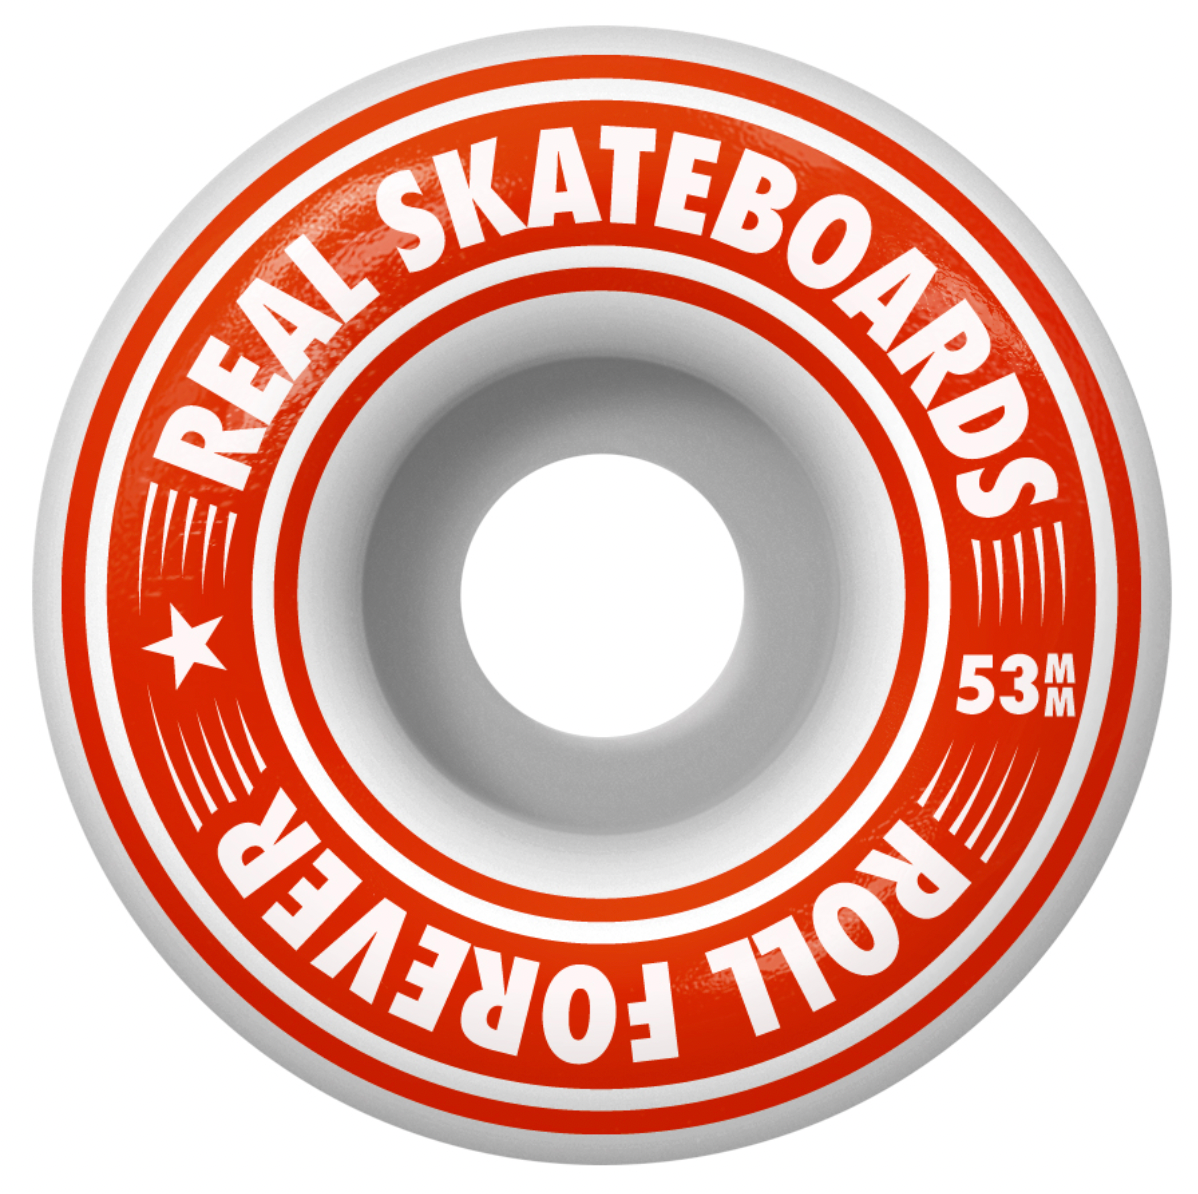 REAL COMPLETE - STEALTH OVALS LG (8") - The Drive Skateshop